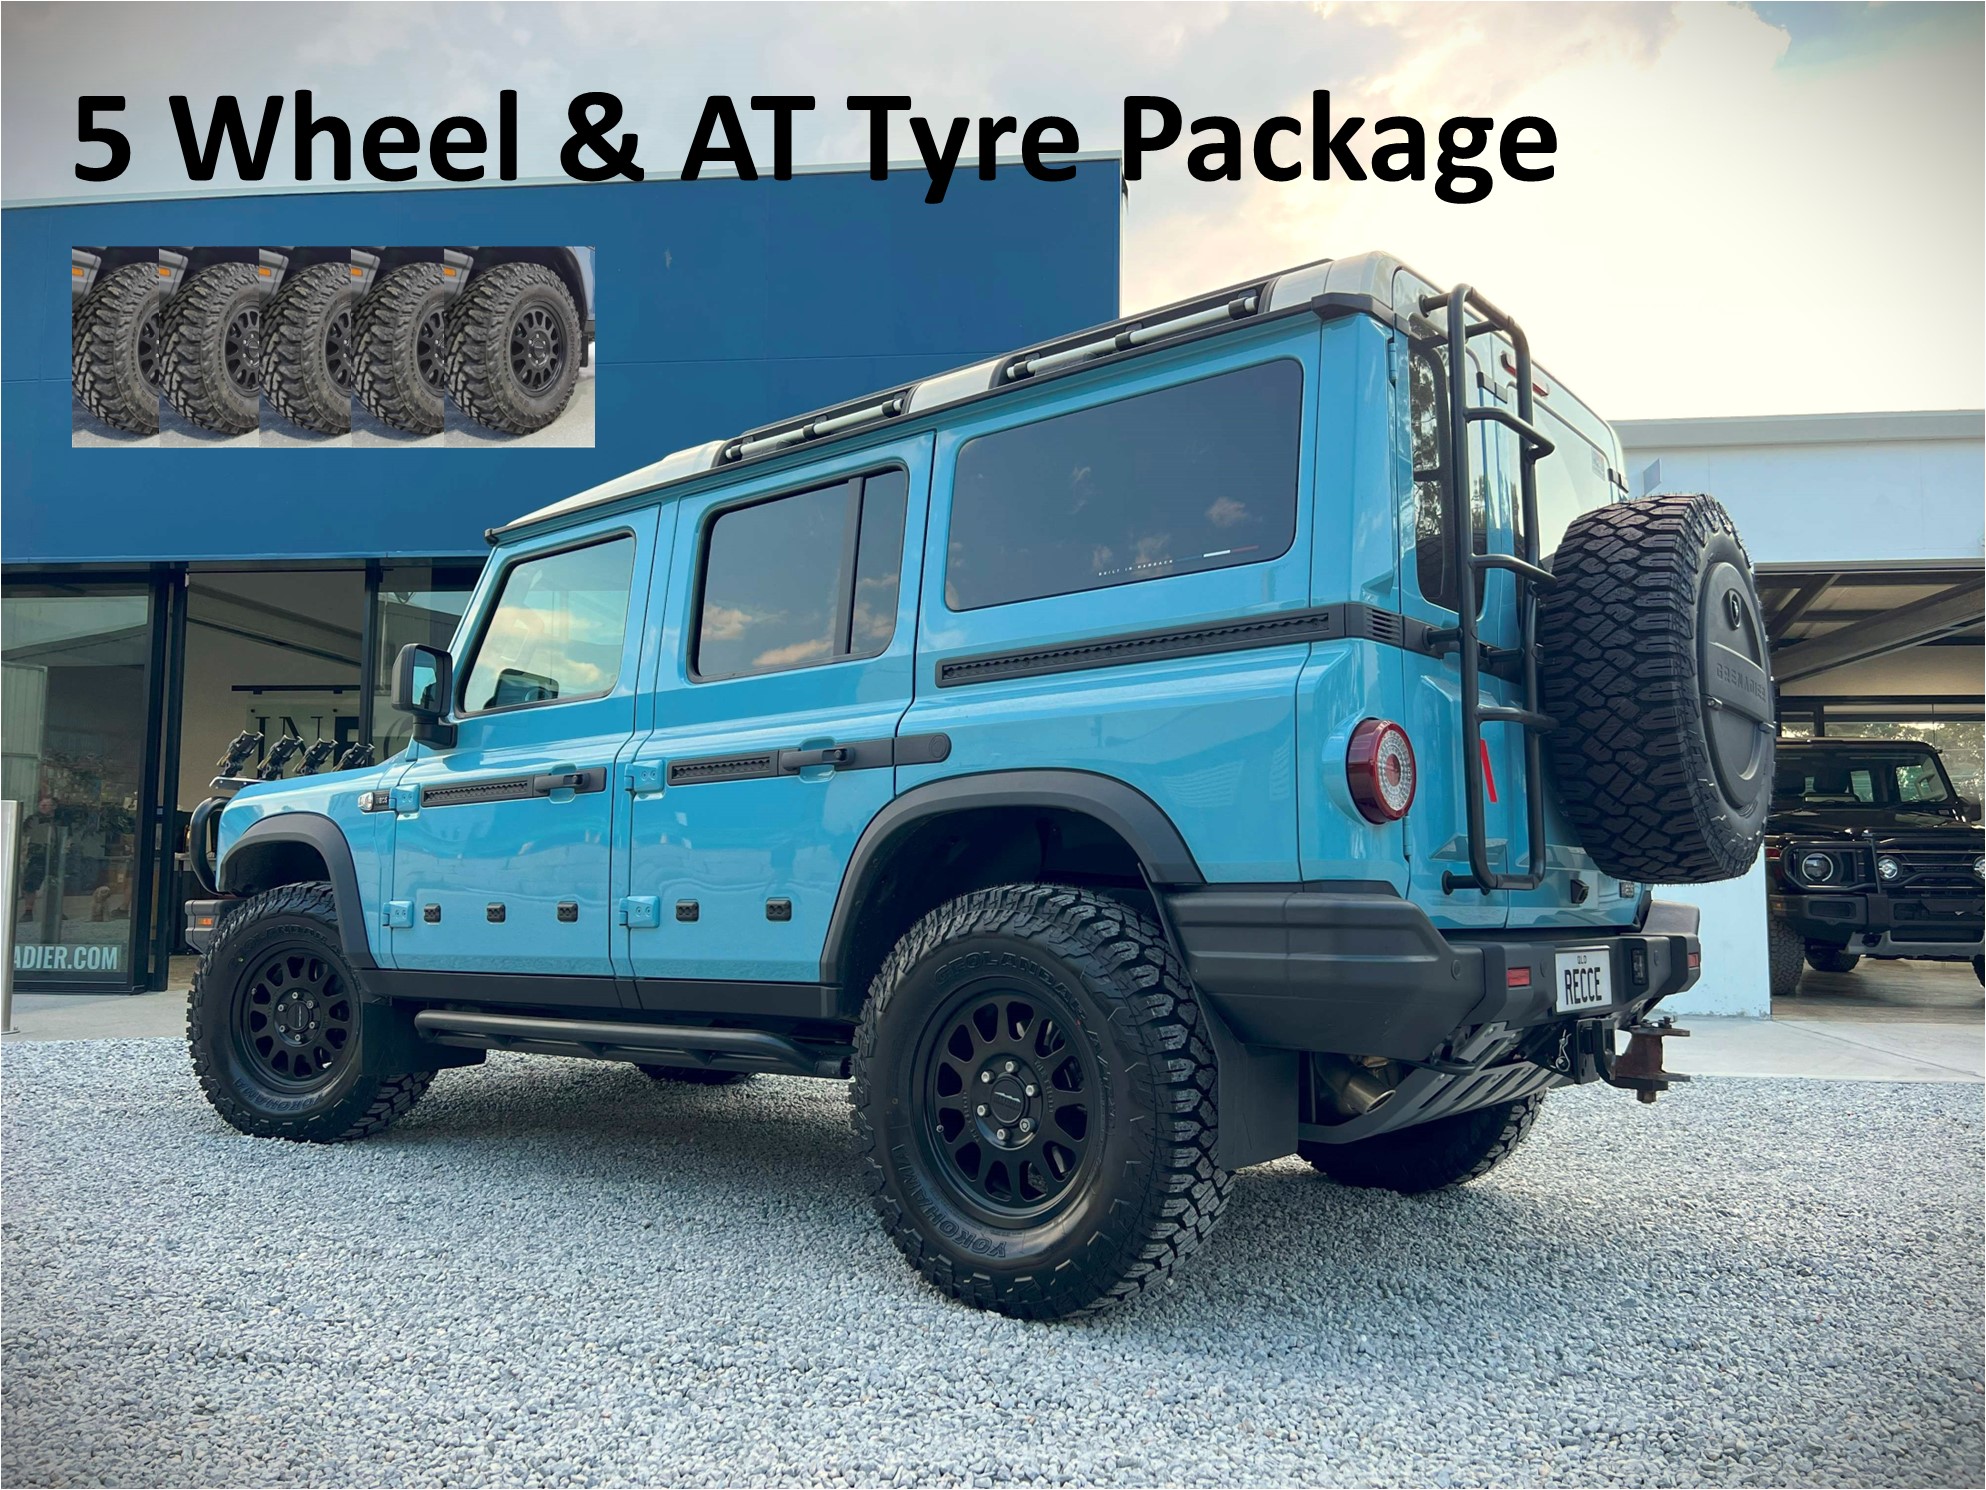 5 Wheel And At Tyre Package